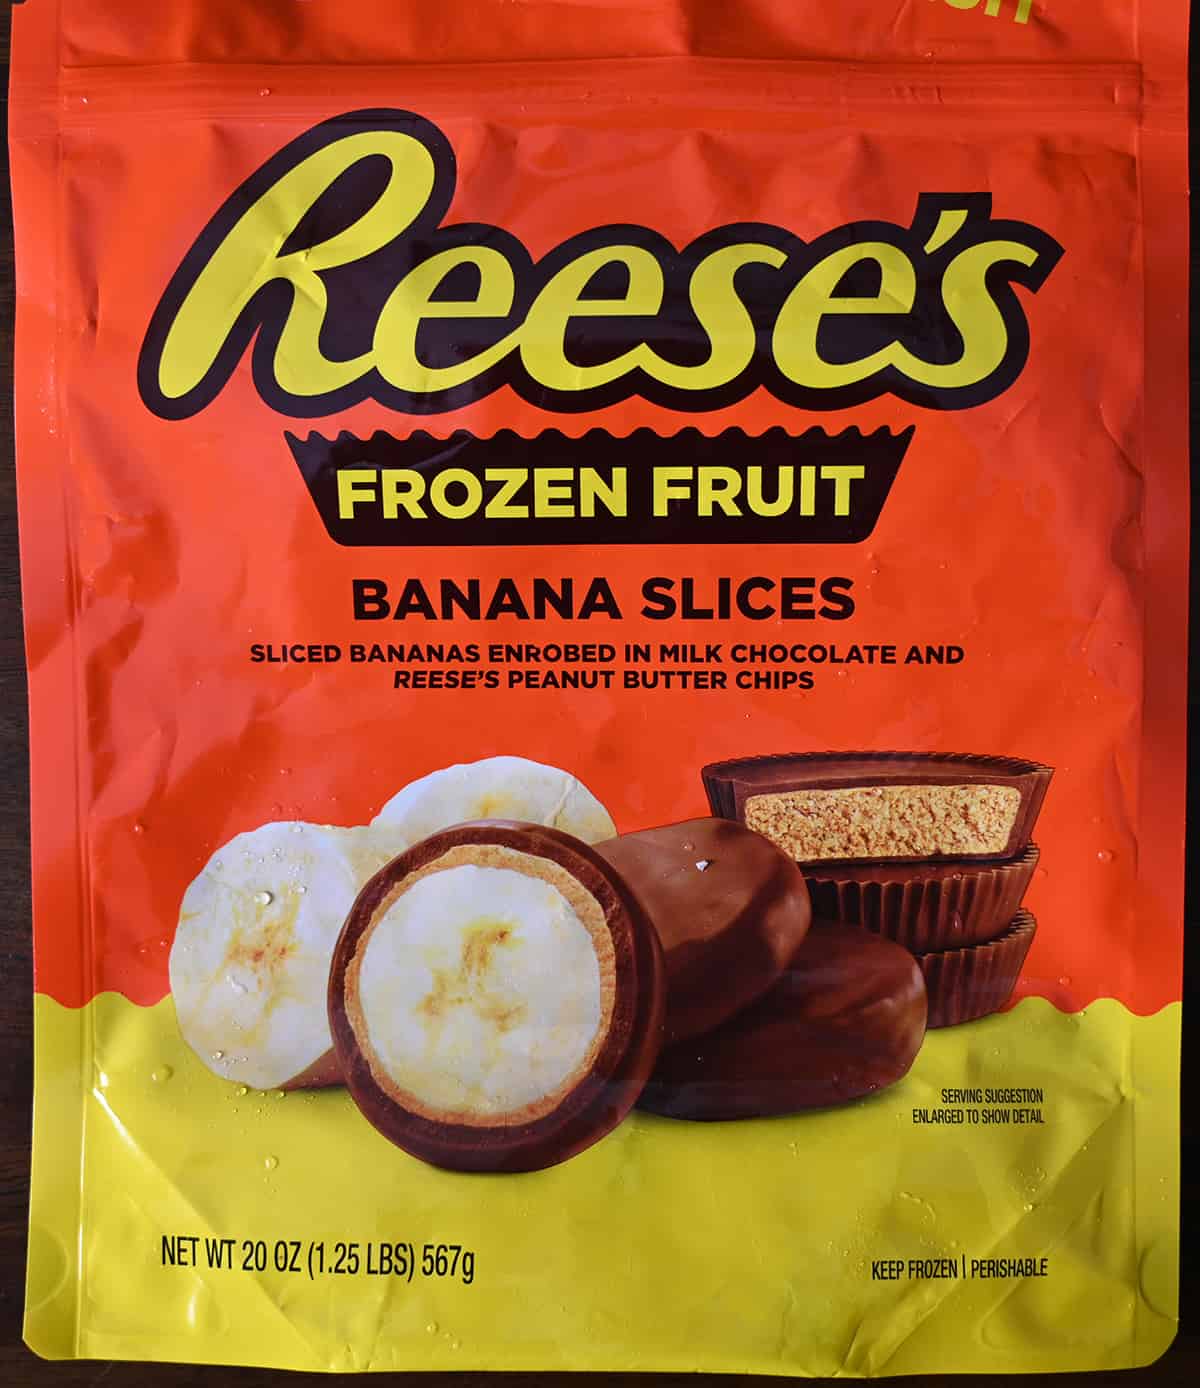 Closeup image of the front of the bag of the Reese's frozen banana slices.